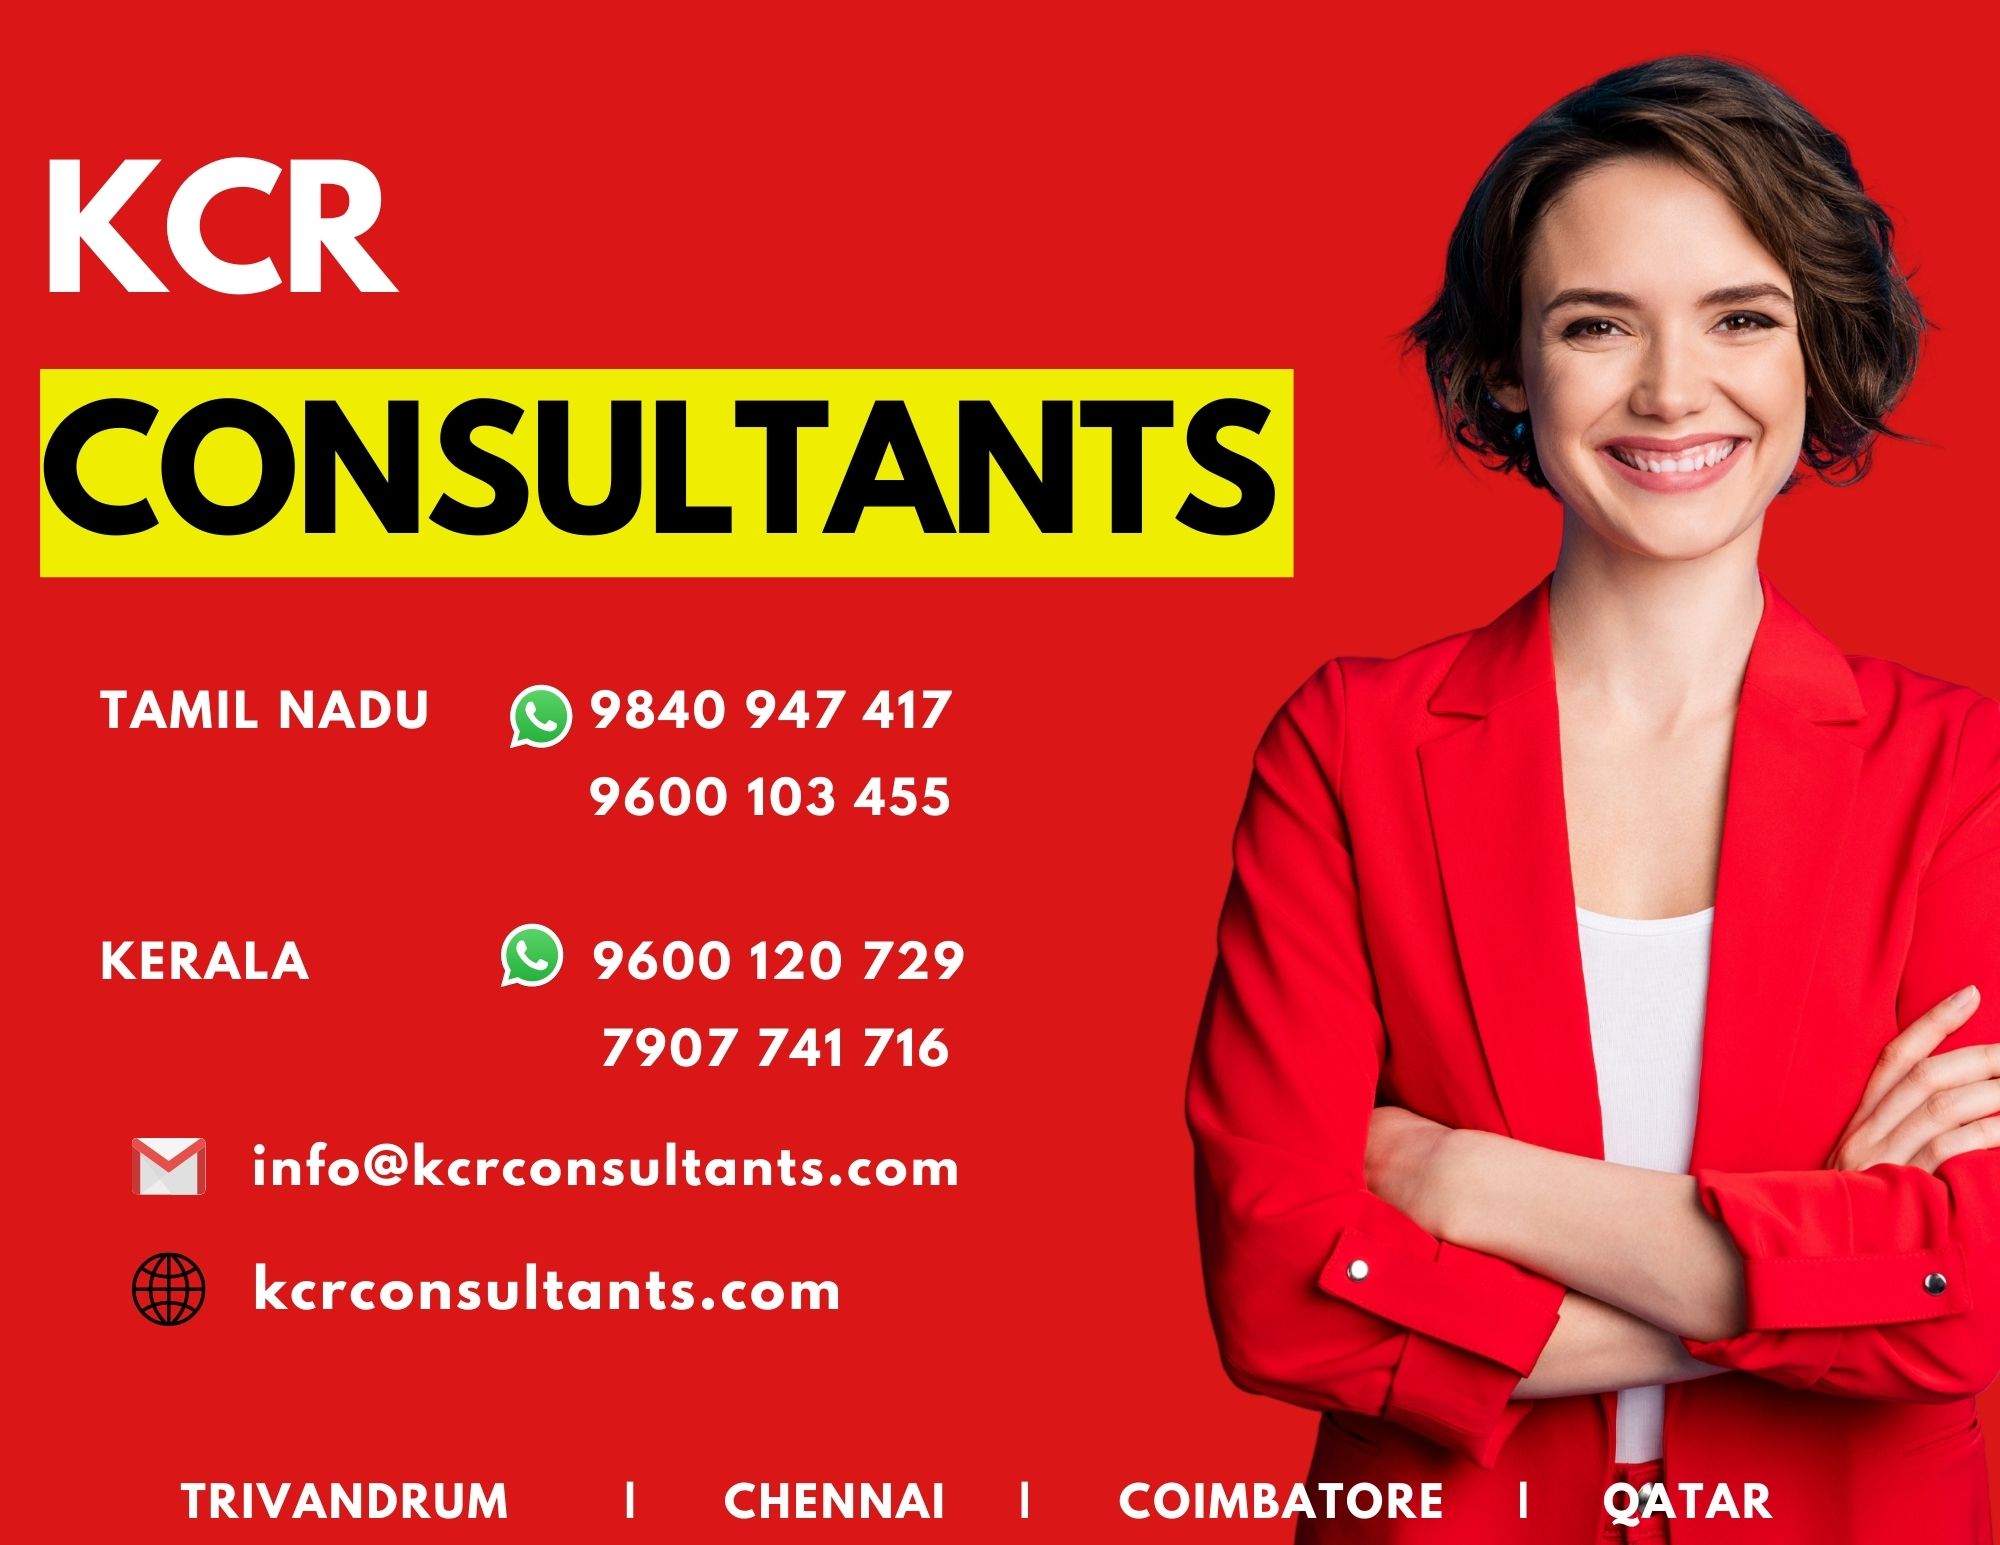 KCR CONSULTANTS - CONTACT.